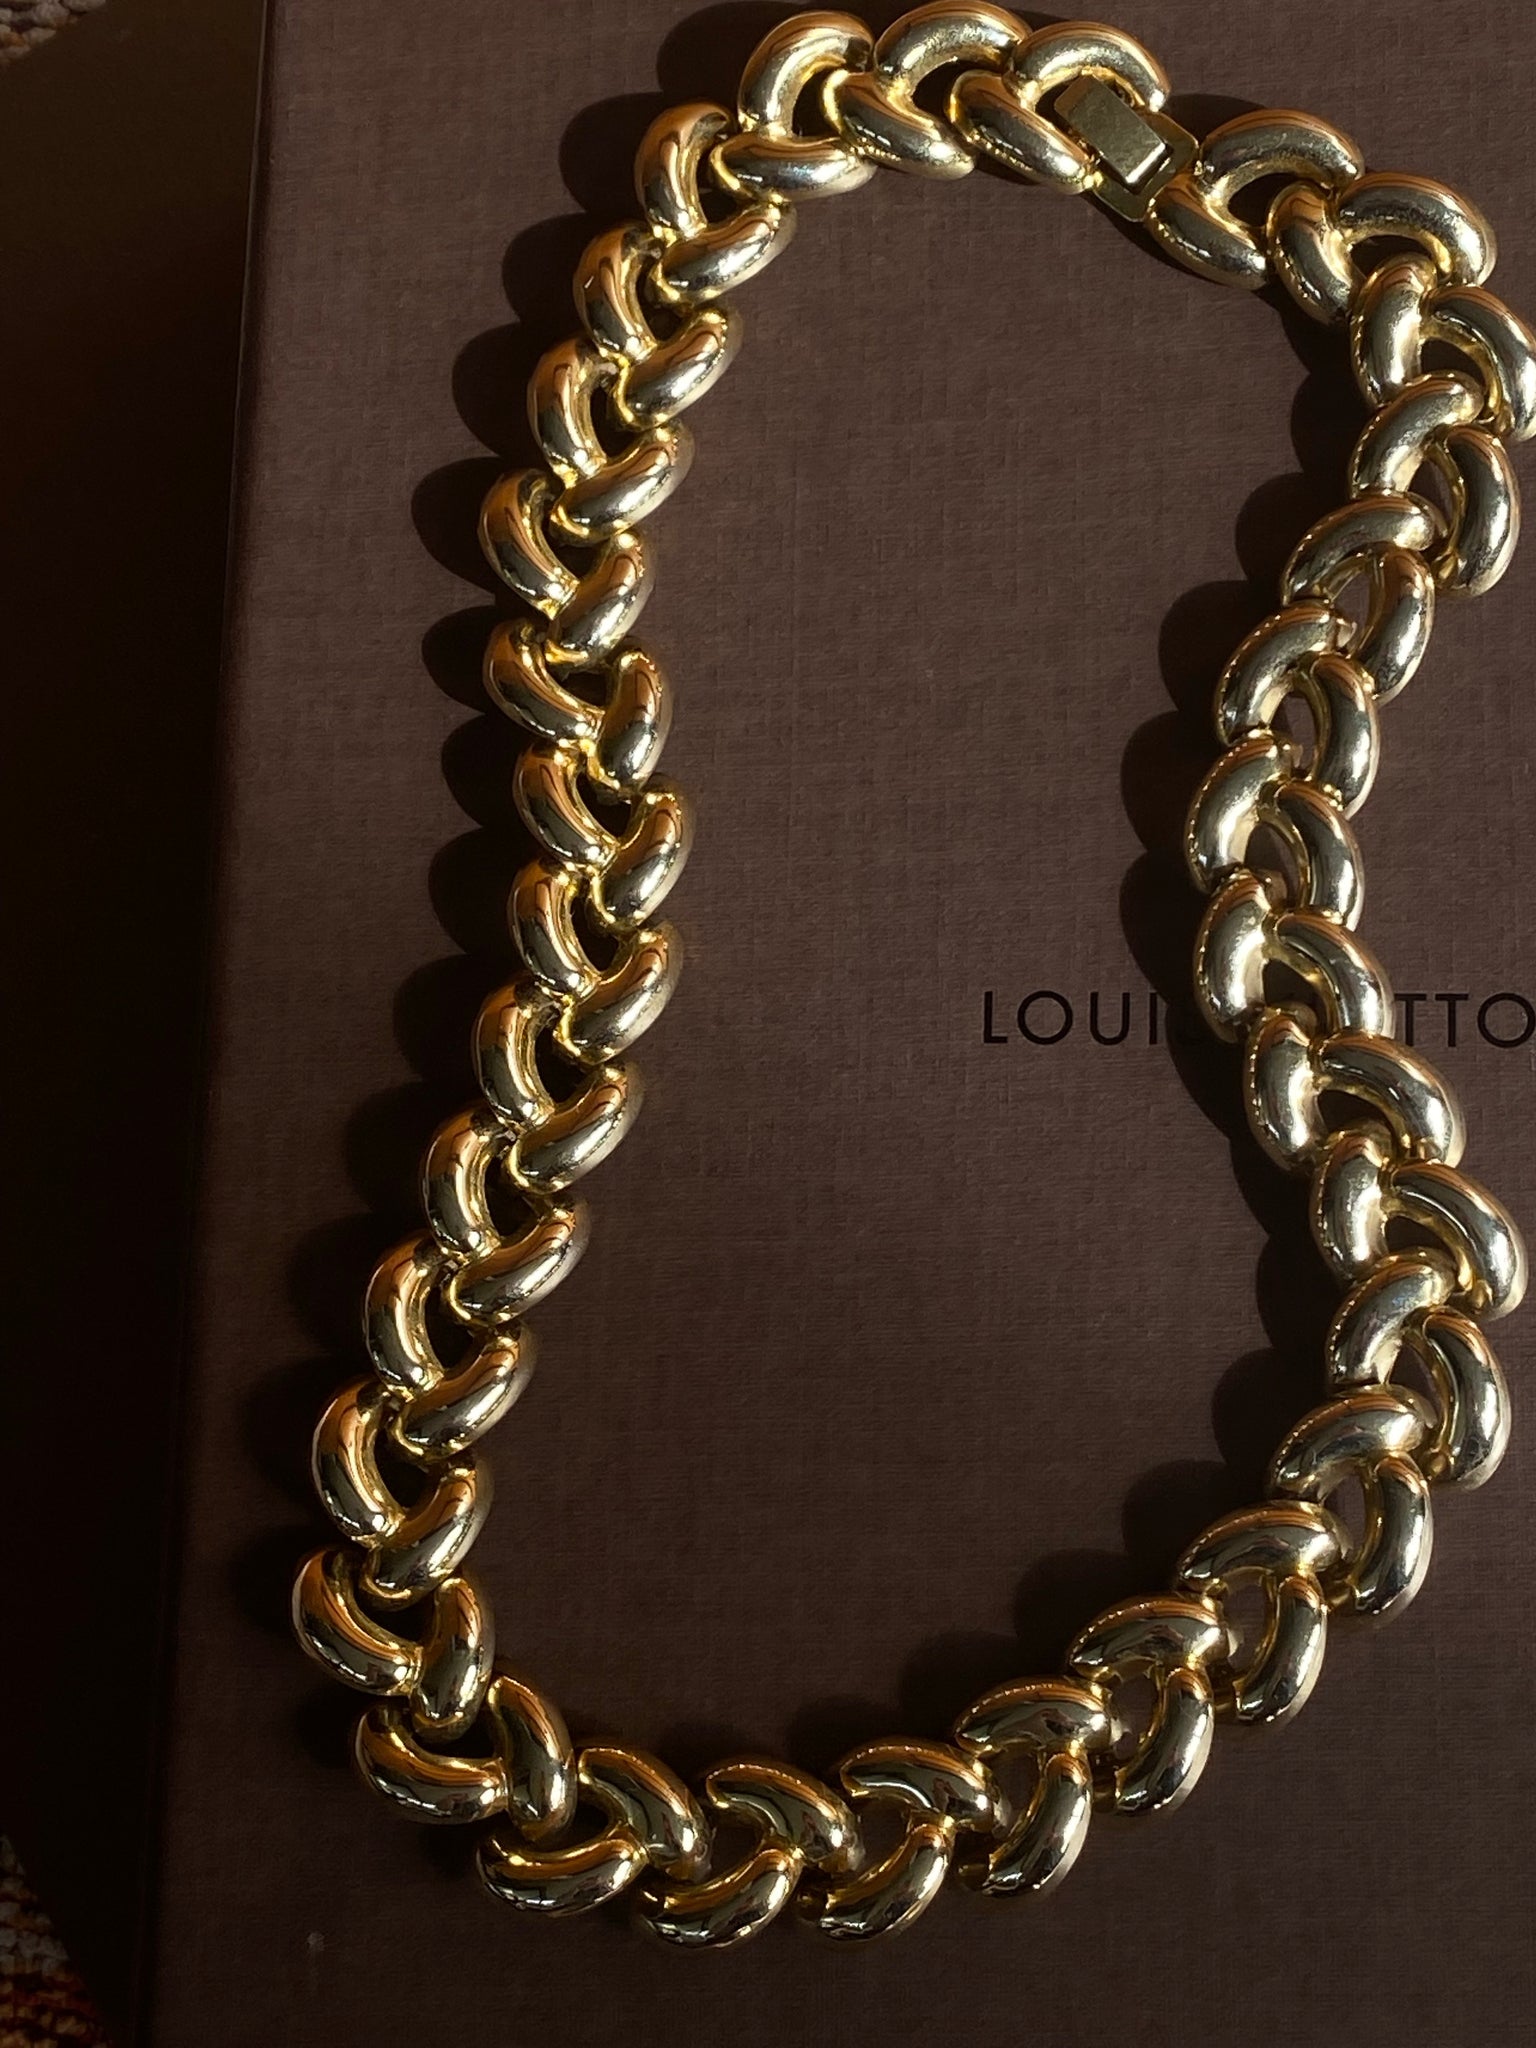 1970-1980 Gold Plated Weave Link Statement Necklace